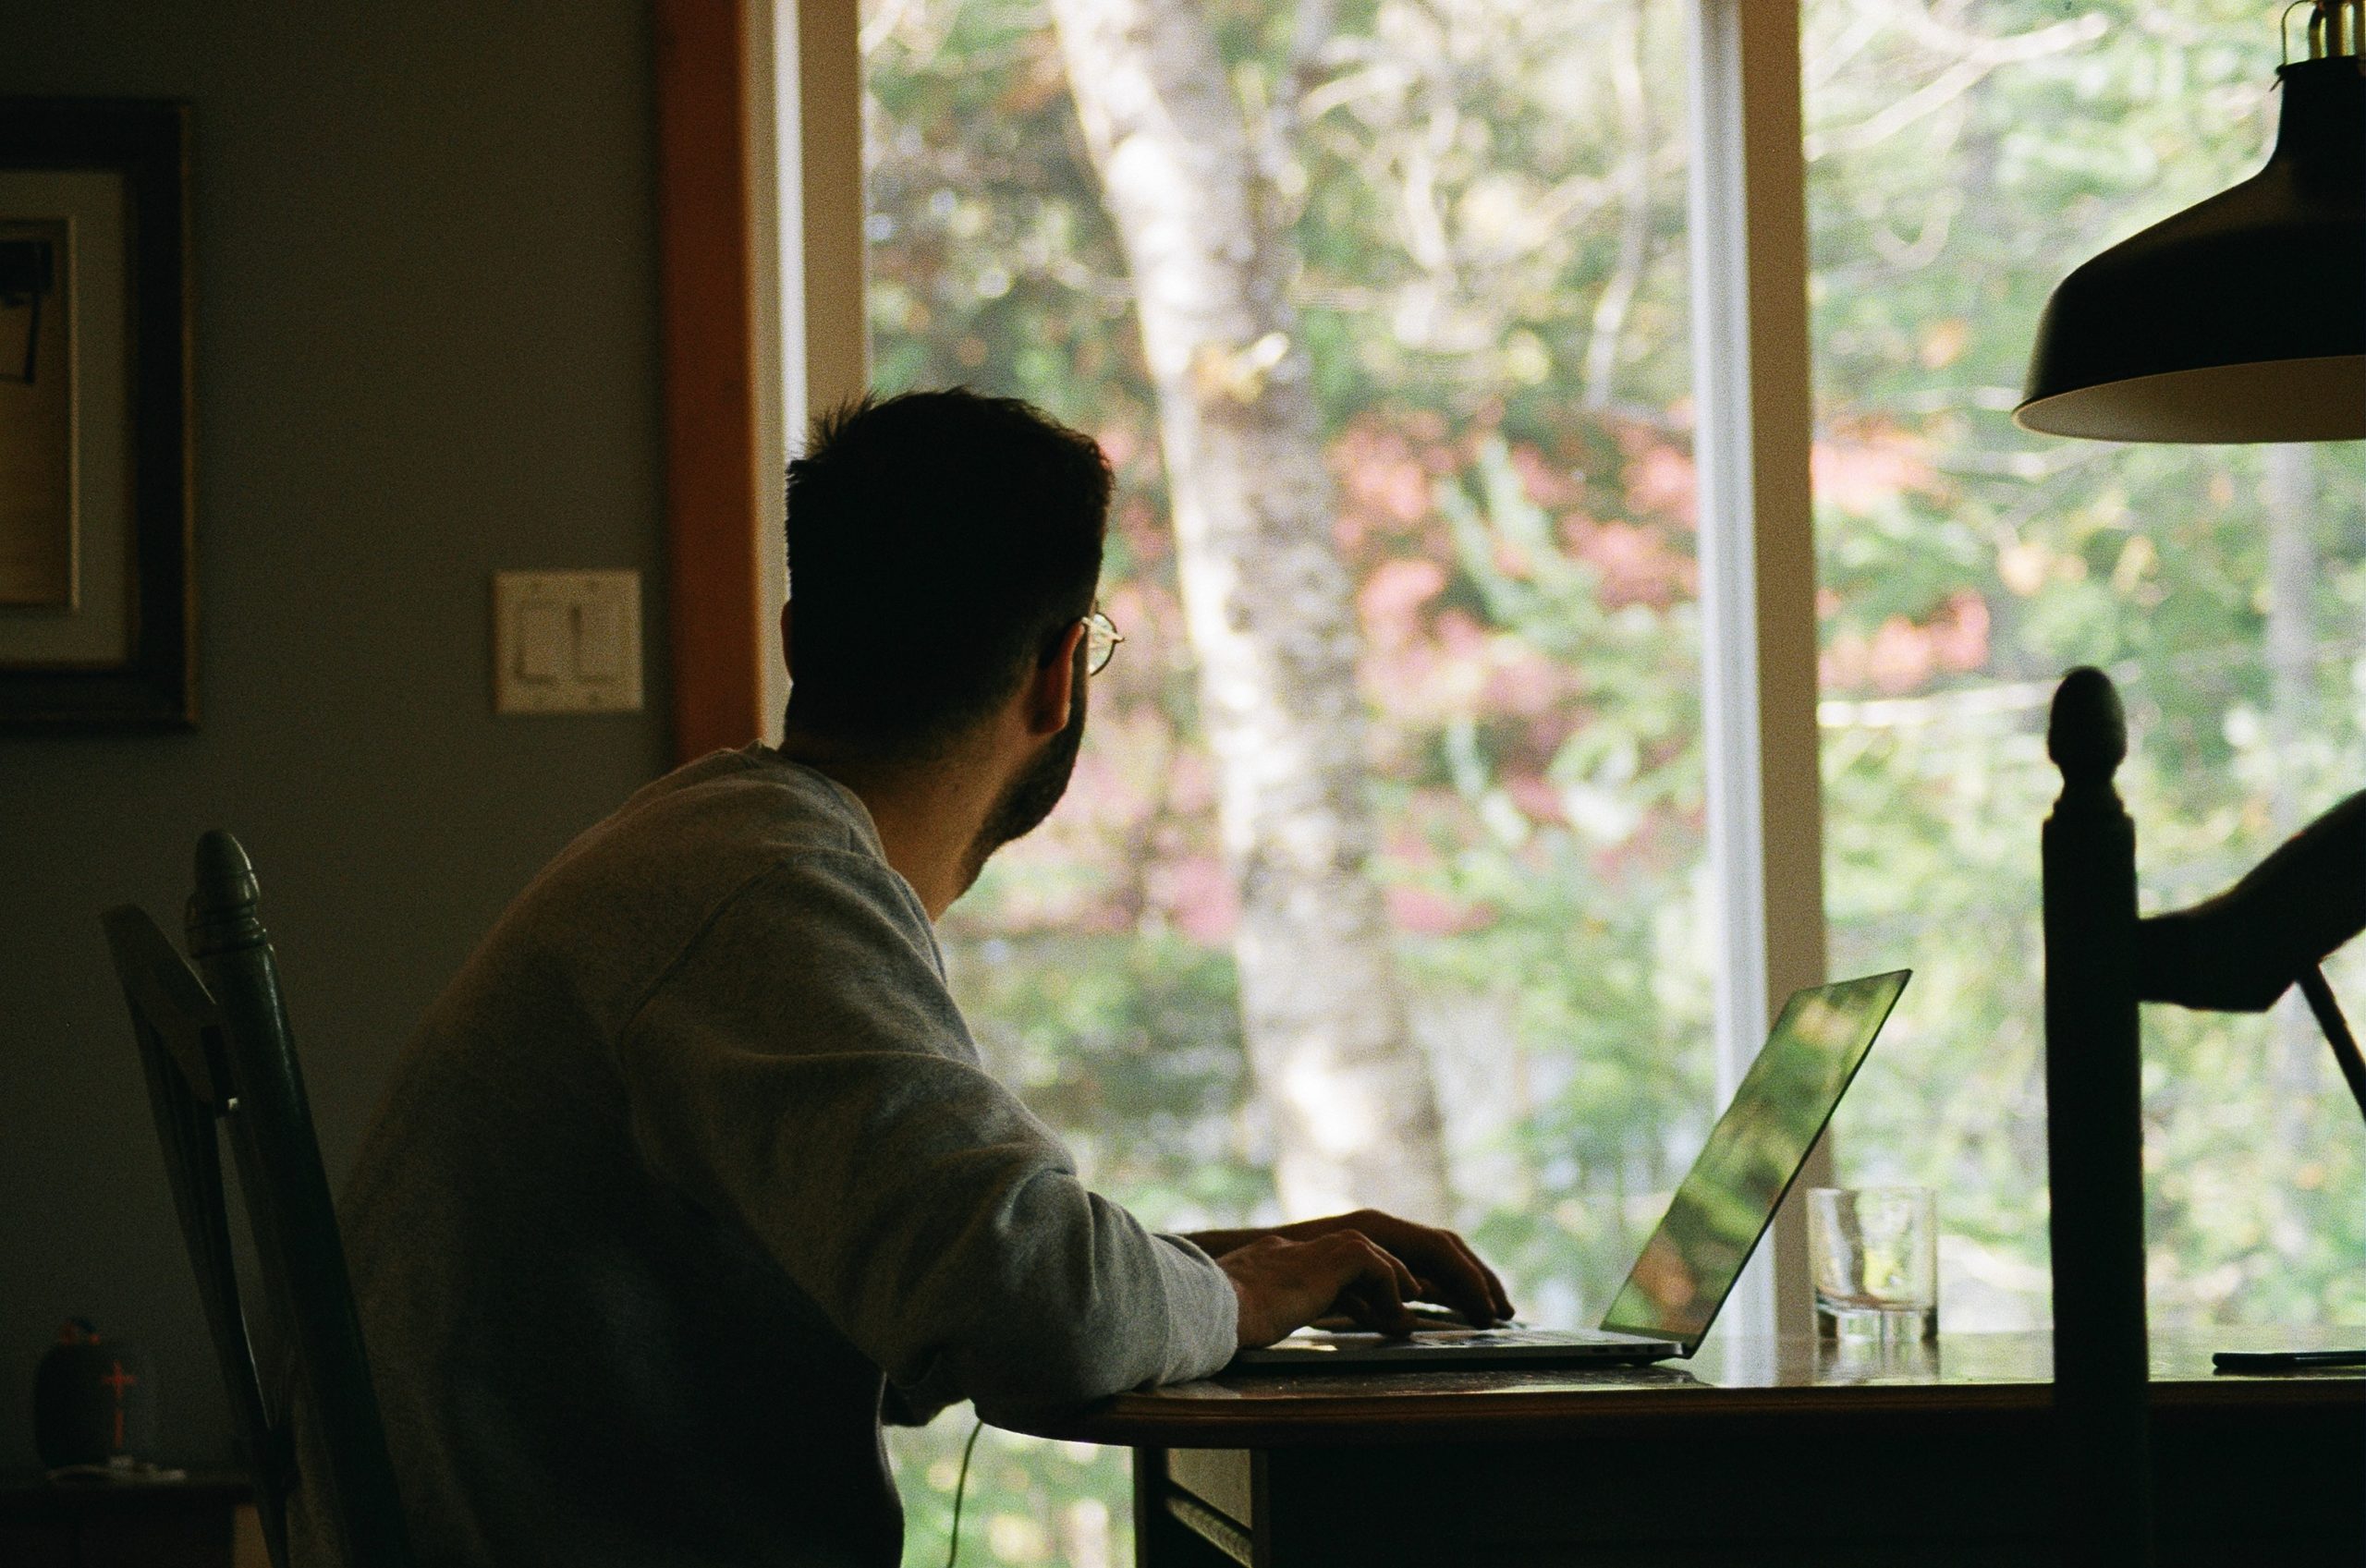 Man in a home office setup looking out the window